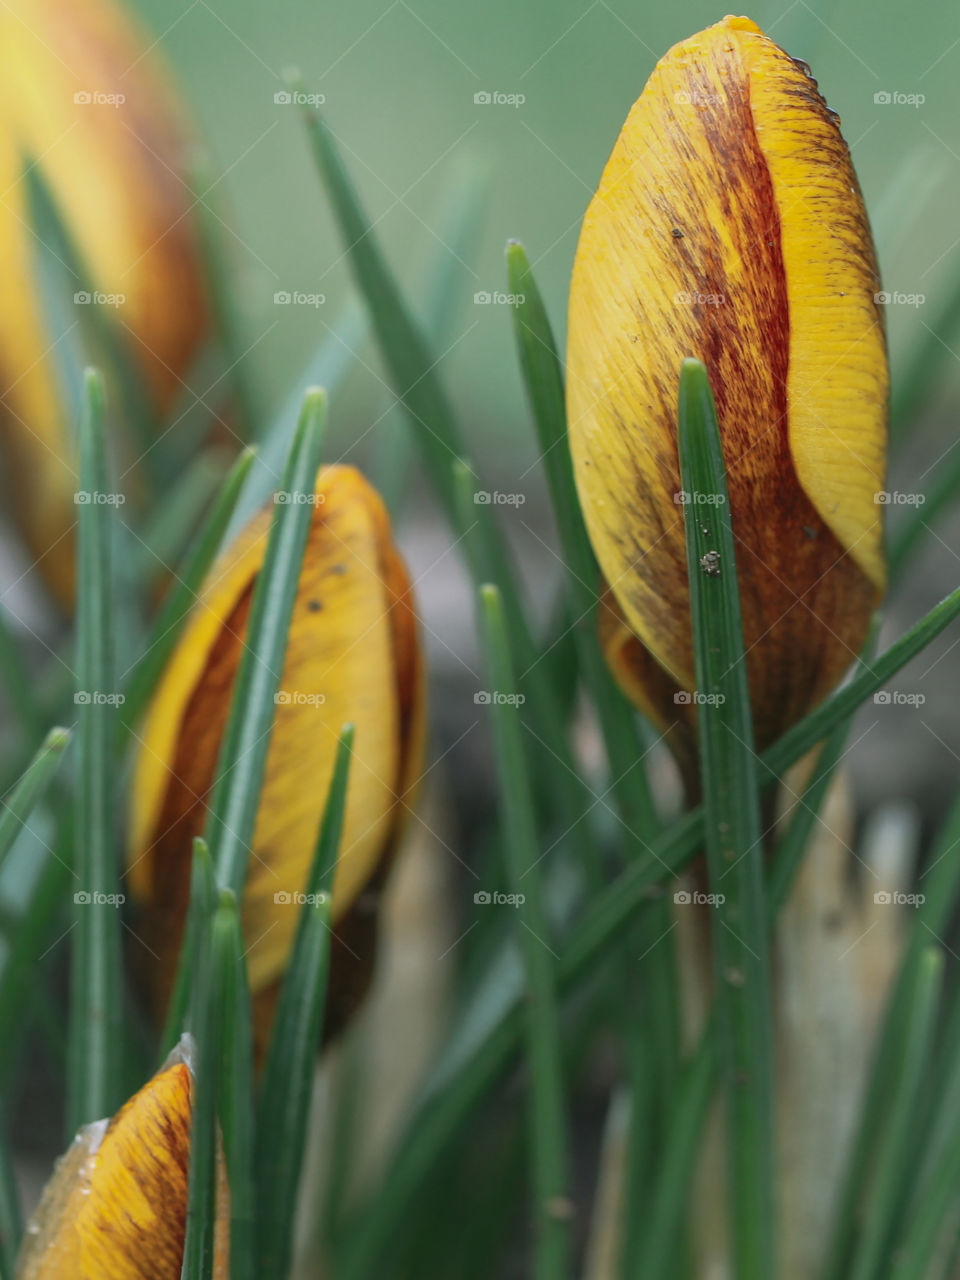 Signs of spring. Closeup macro of yellow crocuses just budding. Their yellow petals tinged with orange red are still closed & there is still frost on the plant but it won’t be long before the frost melts & they open to the warming sun. 